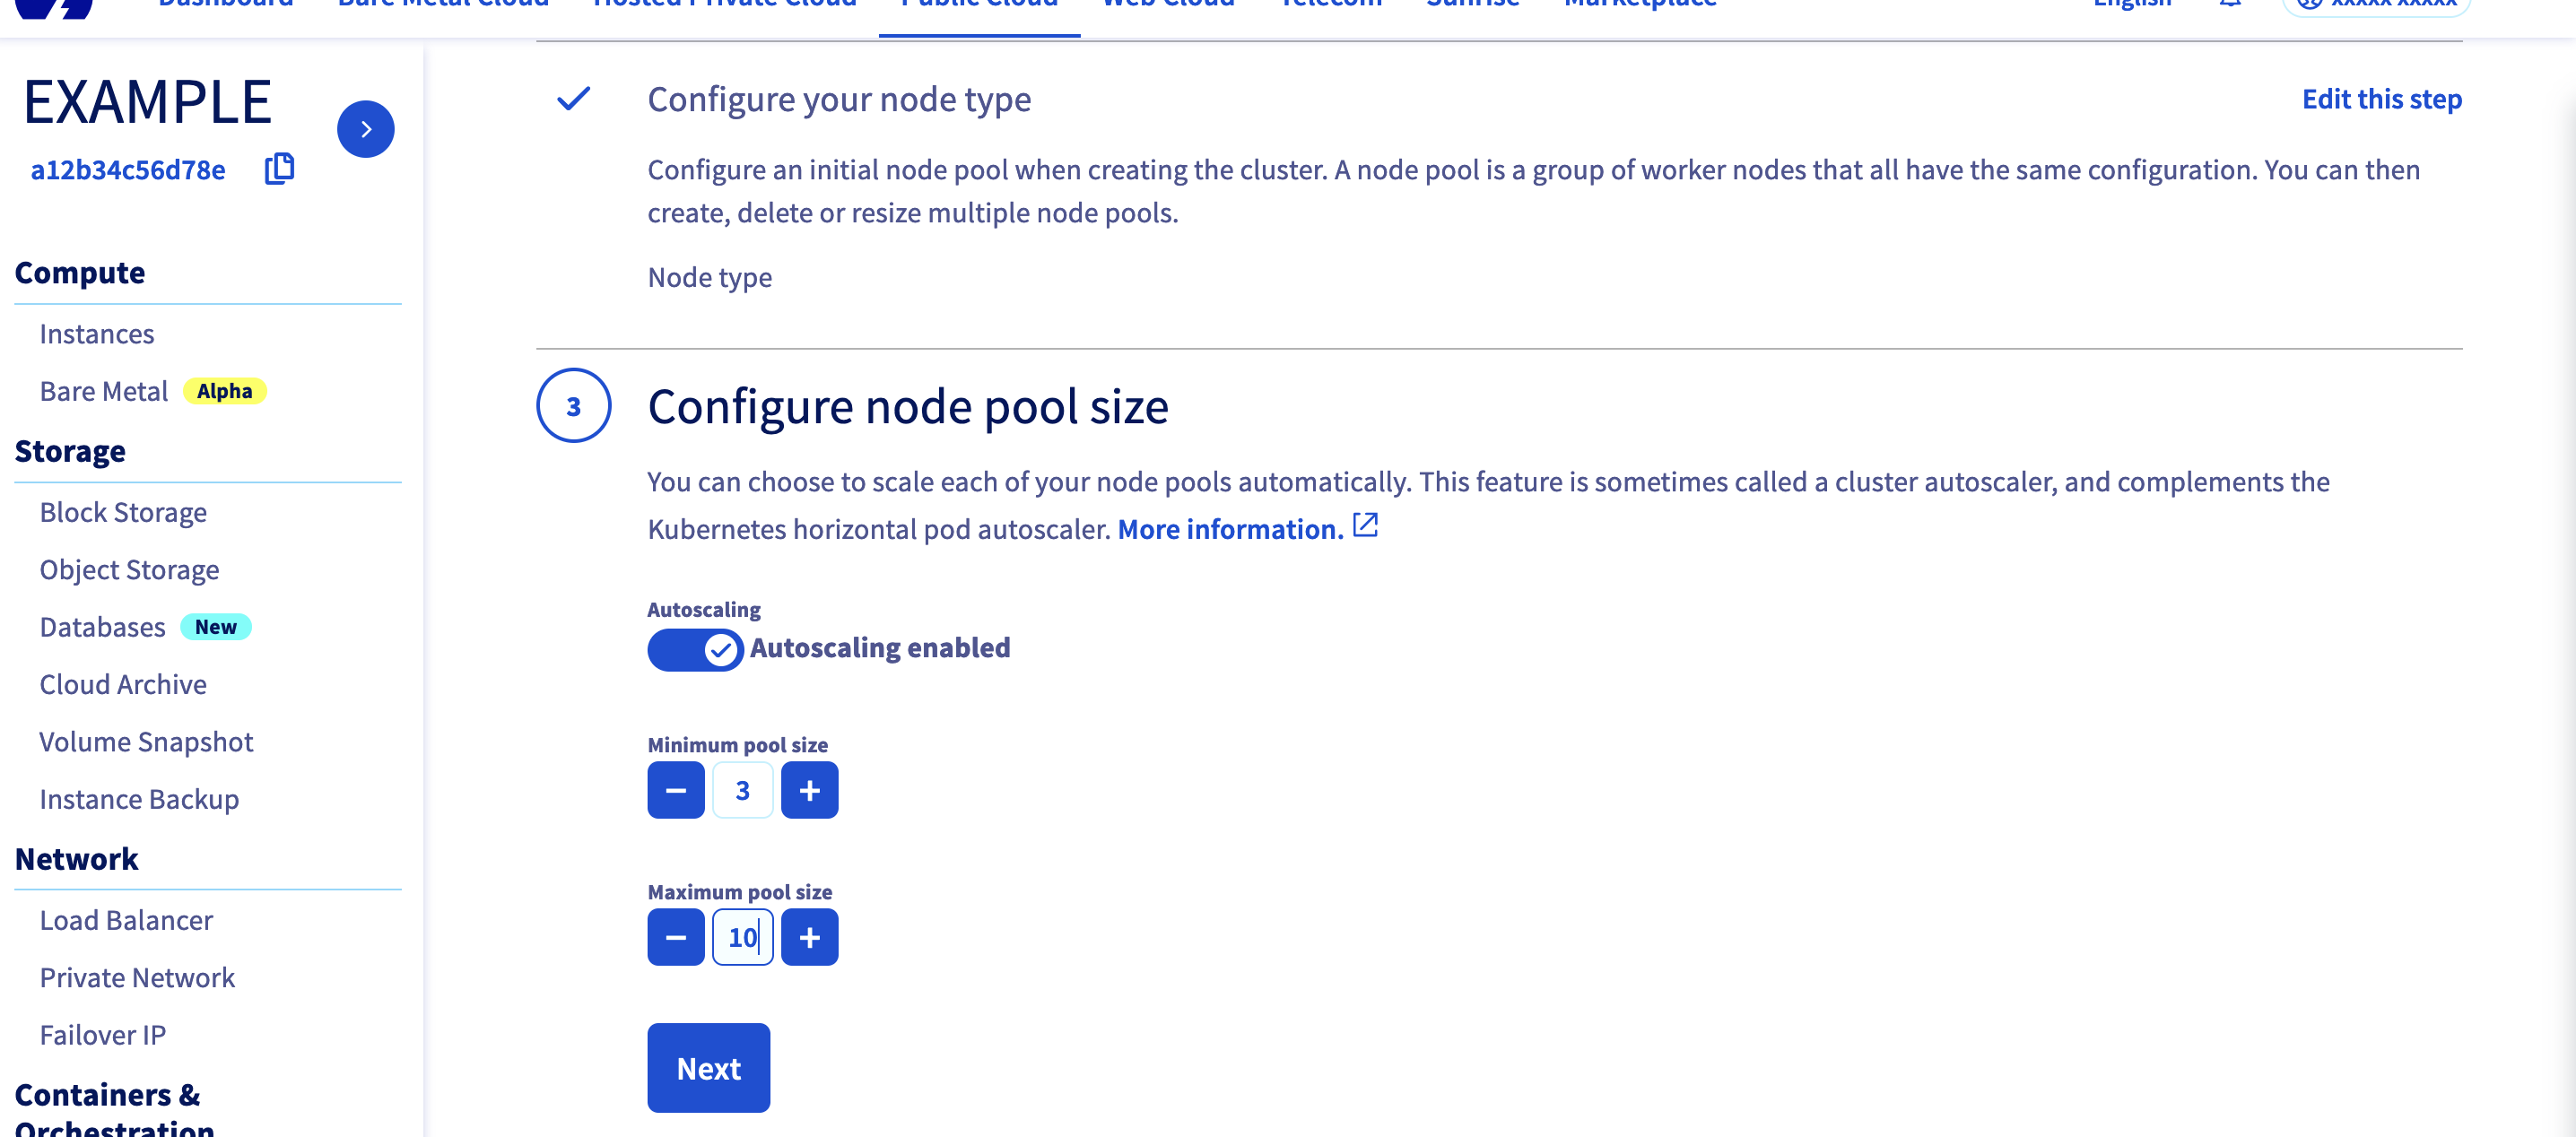 Define a size and autoscaling for your second node pool